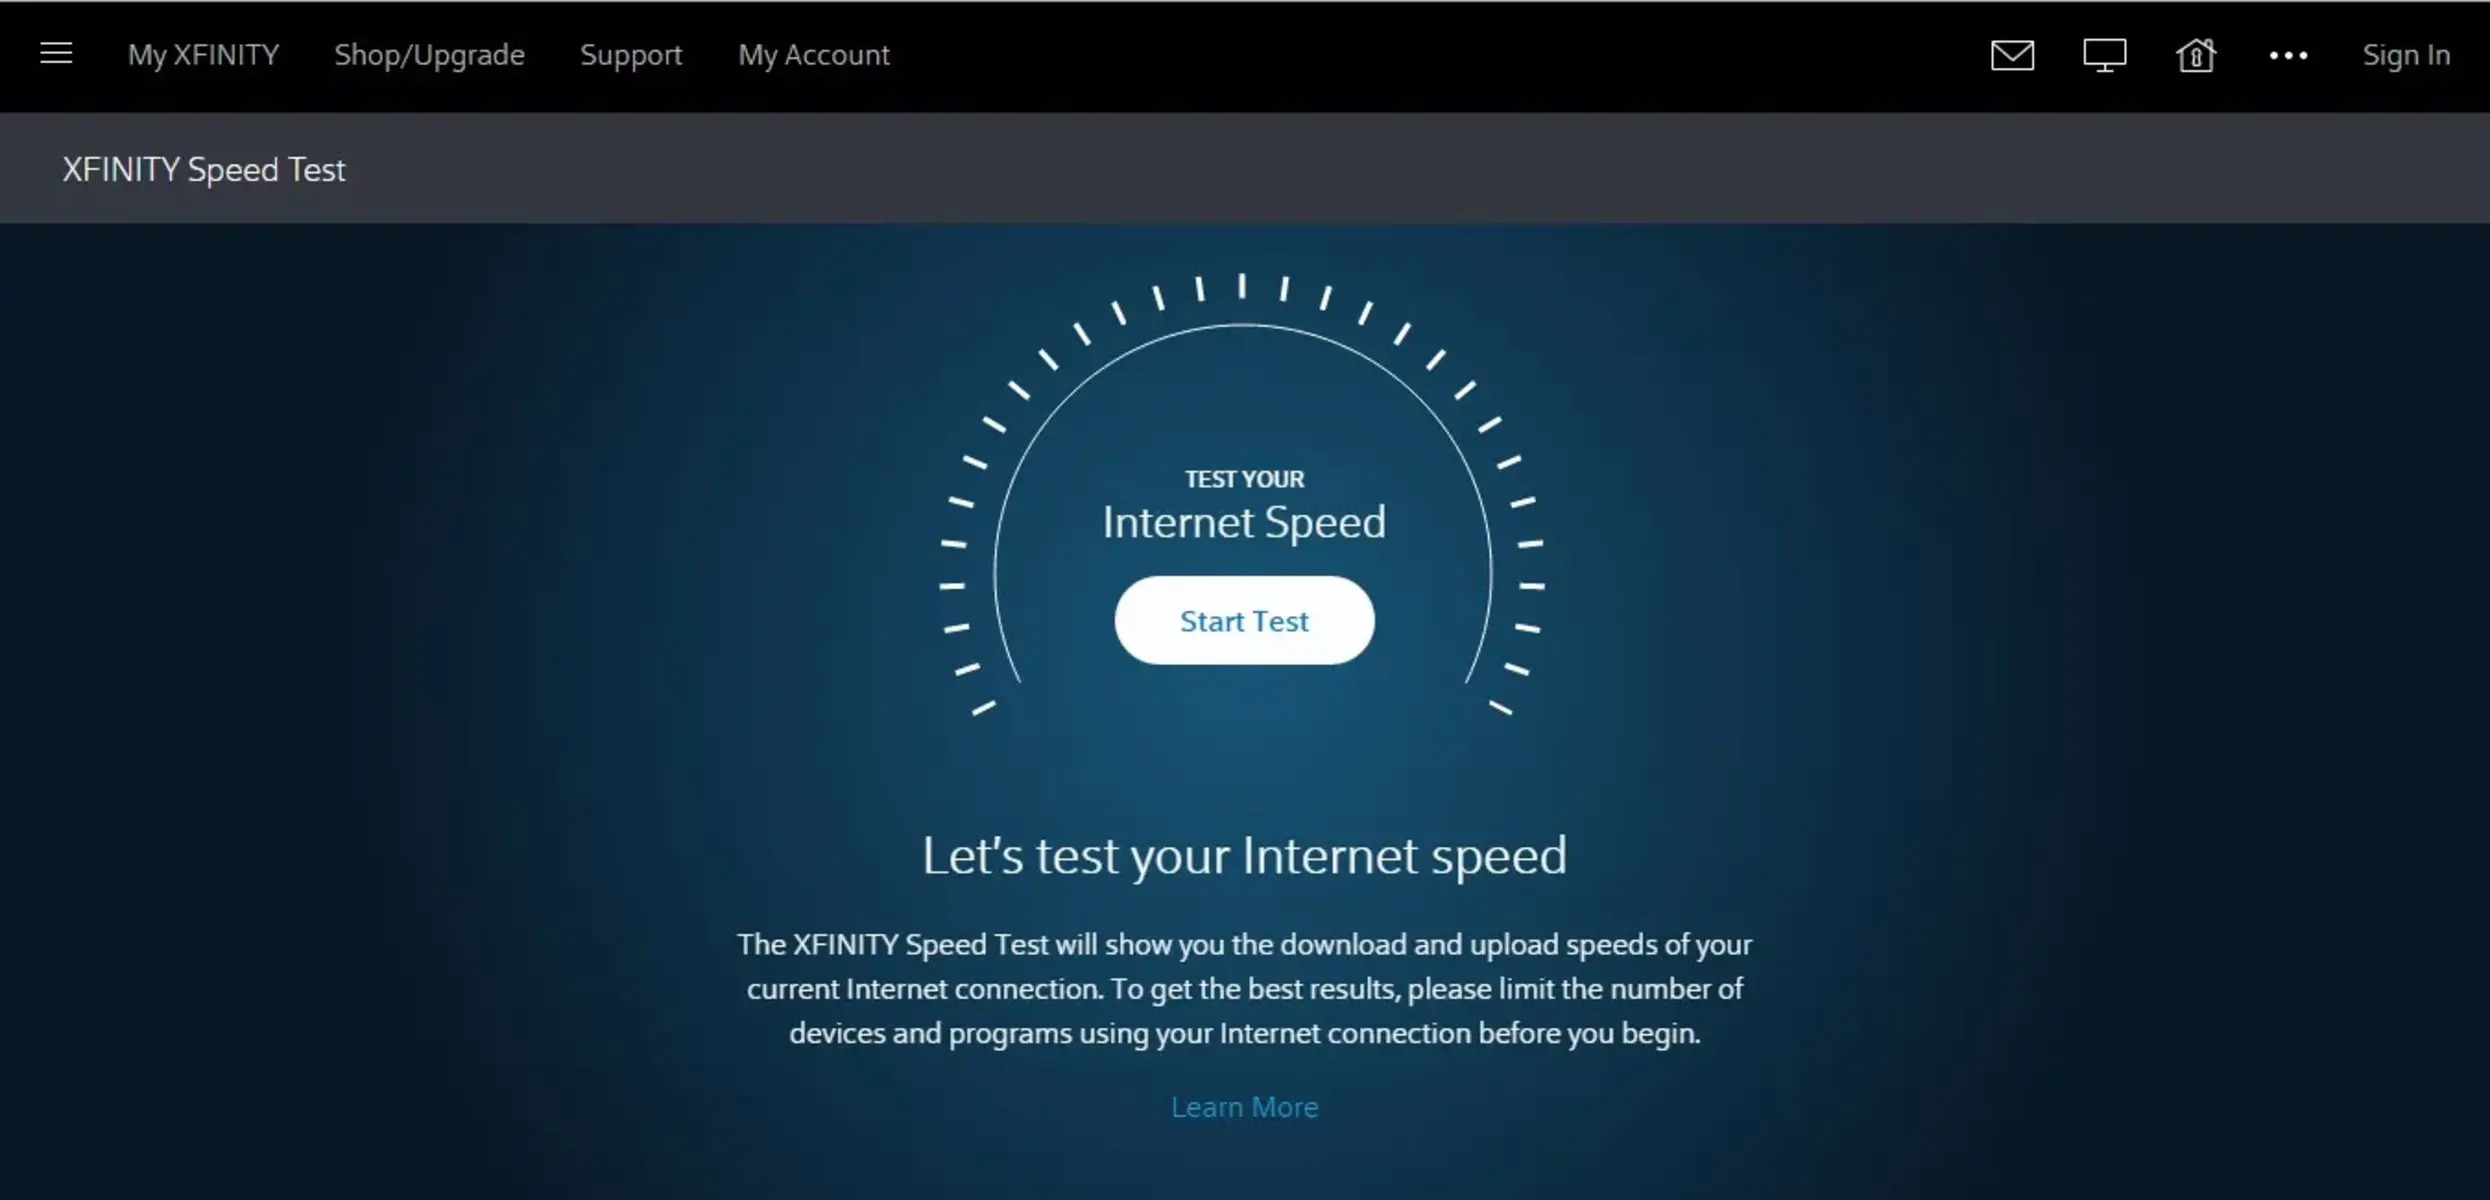 Comcast/Xfinity Speed Test: A Full Review